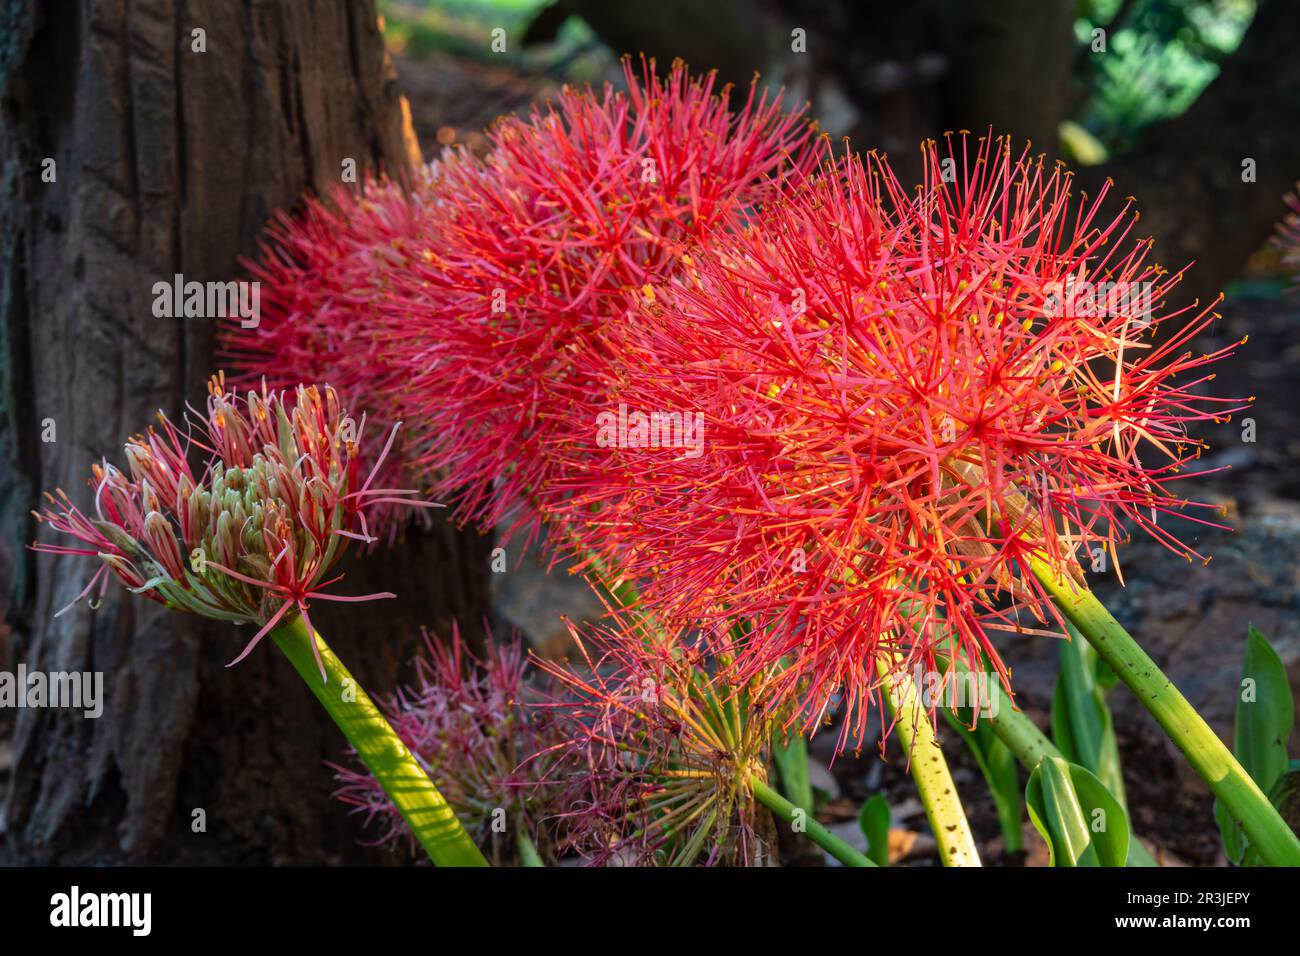 Closeup view of bright and colorful orange red flowers of the blood lily or scadoxus multiflorus in outdoor tropical garden on natural background Stock Photo